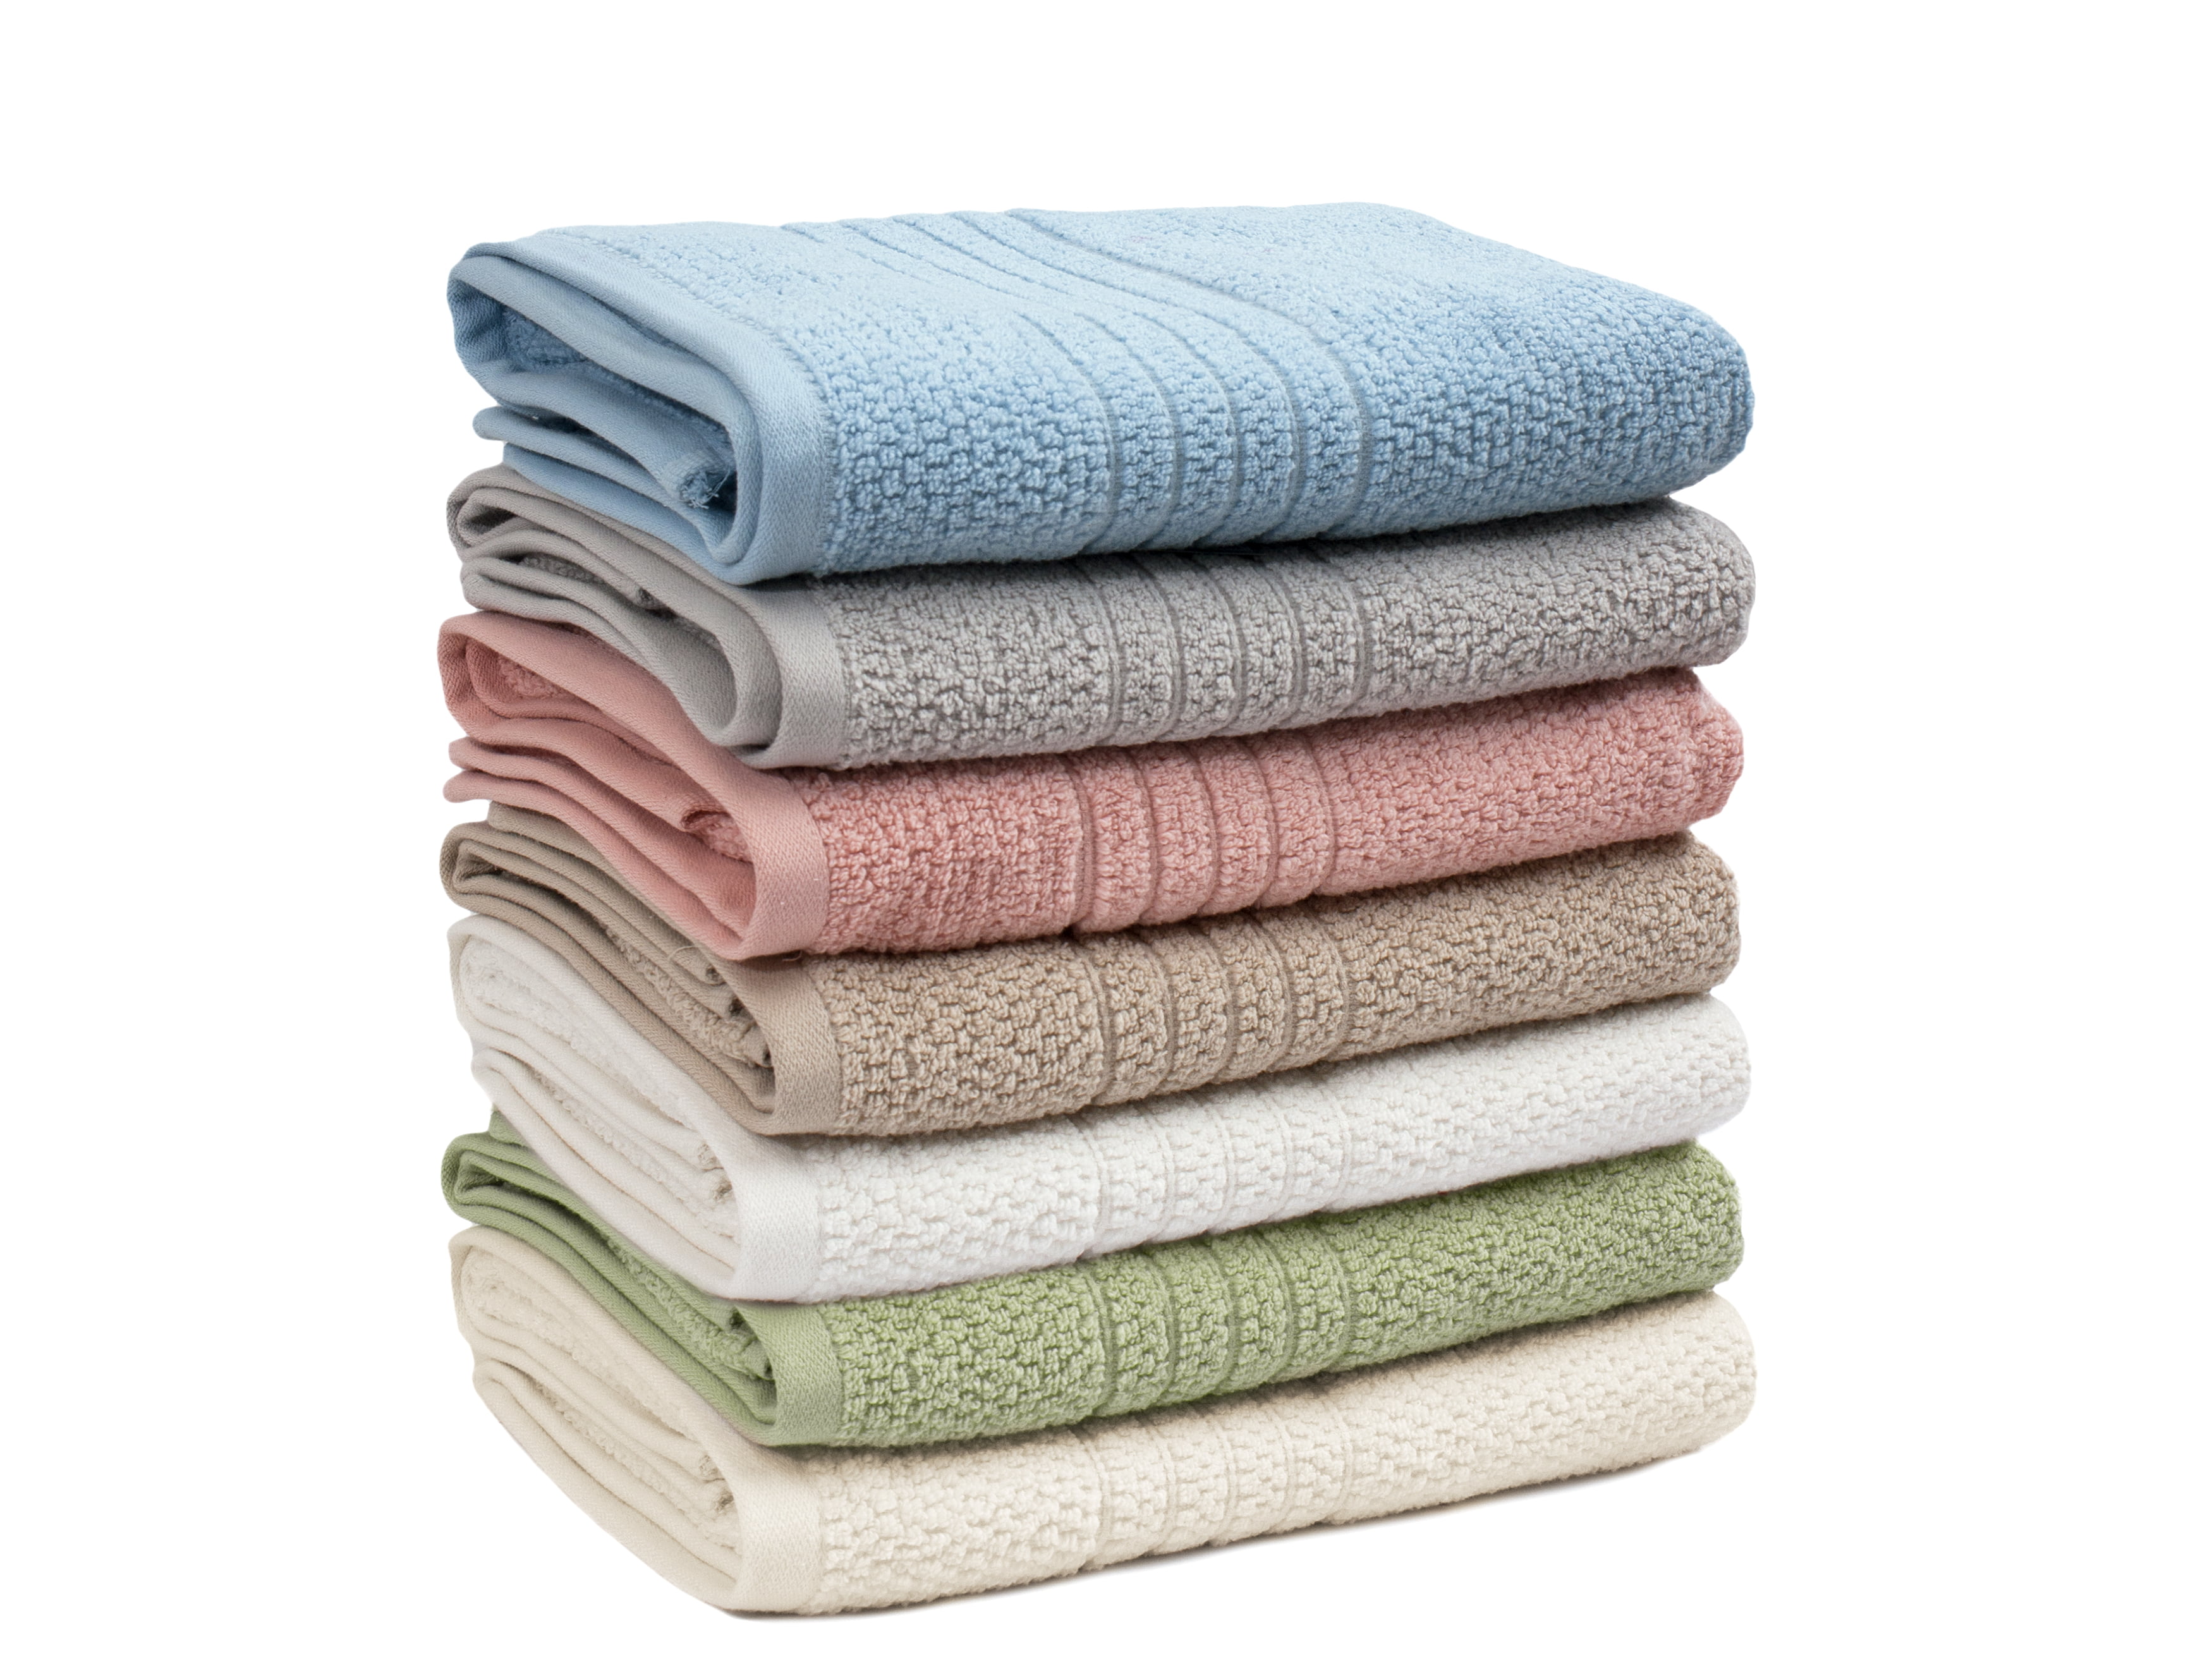 YTYC Towels,29x59 Inch Extra Large Bath Towels Sets for Bathroom Ultra Soft  Quick Dry Towels Bathroom Sets Clearance Prime Fluffy Coral Waffle